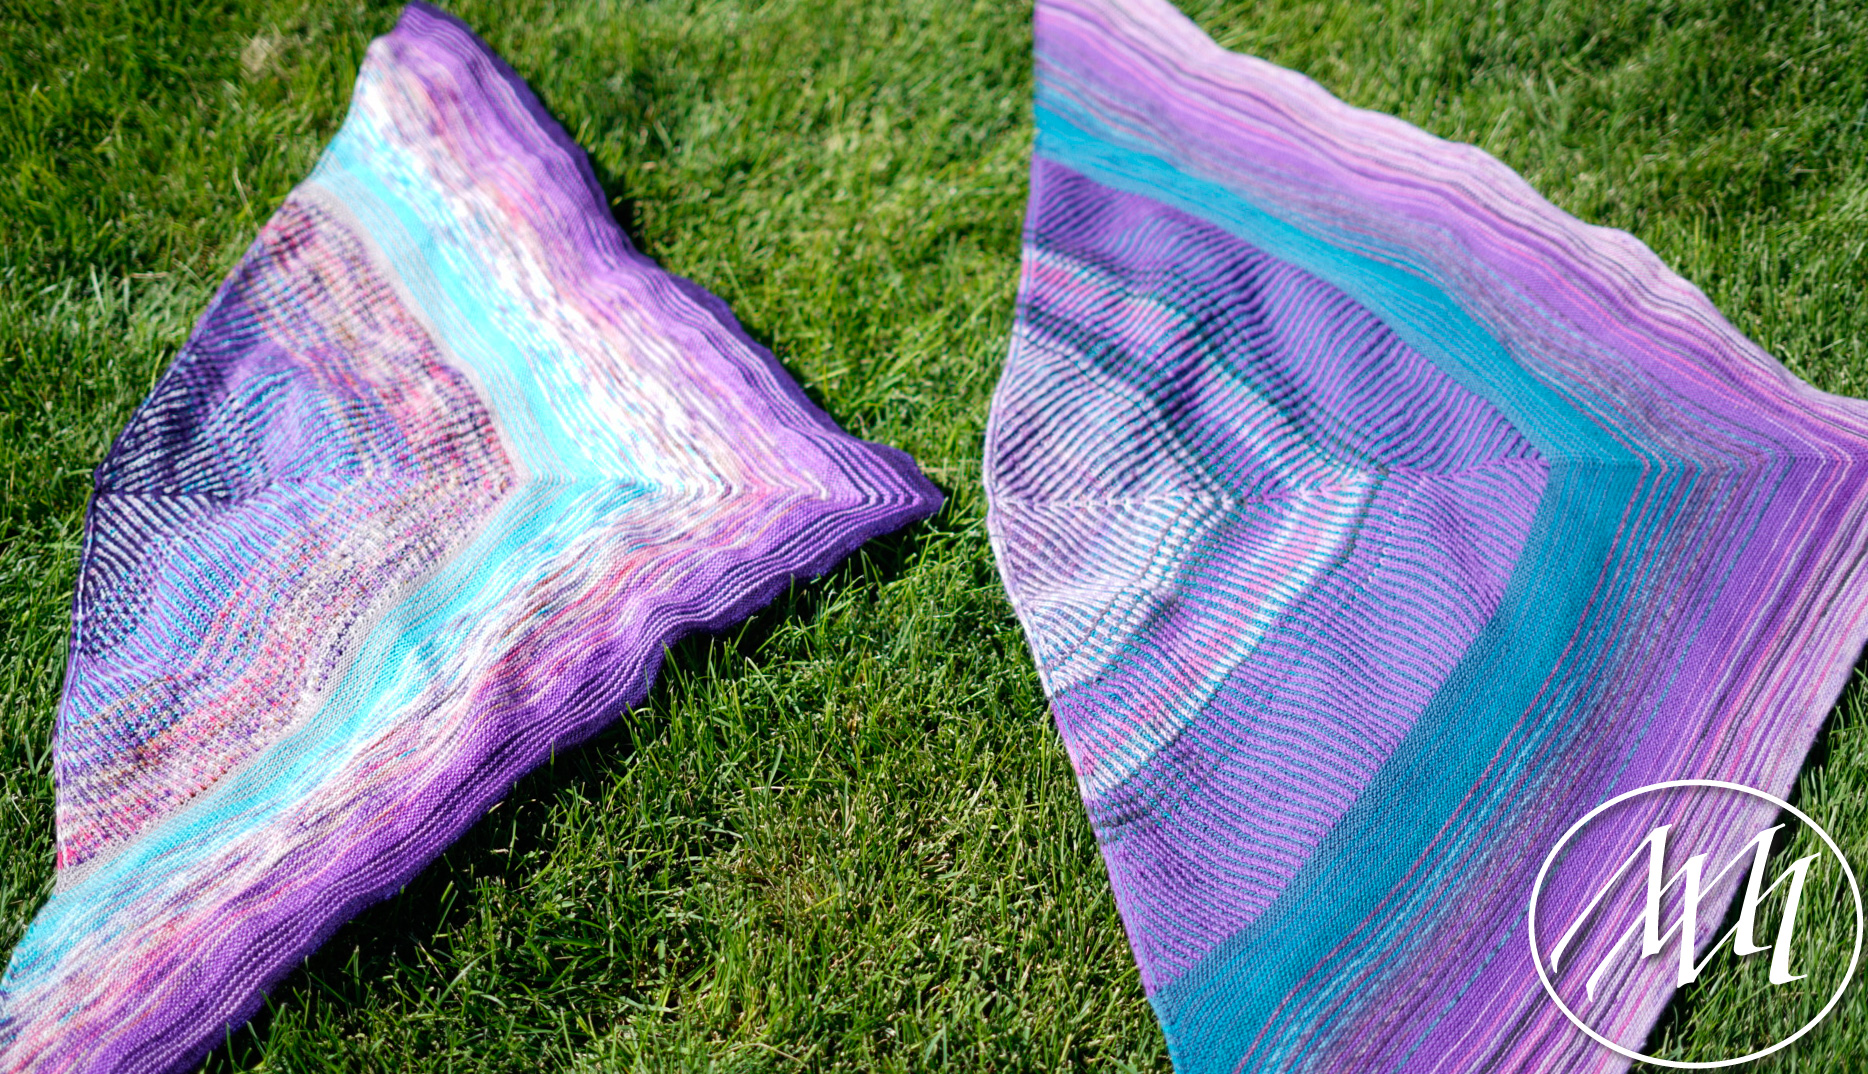 Two What the Fade Shawls in the Grass